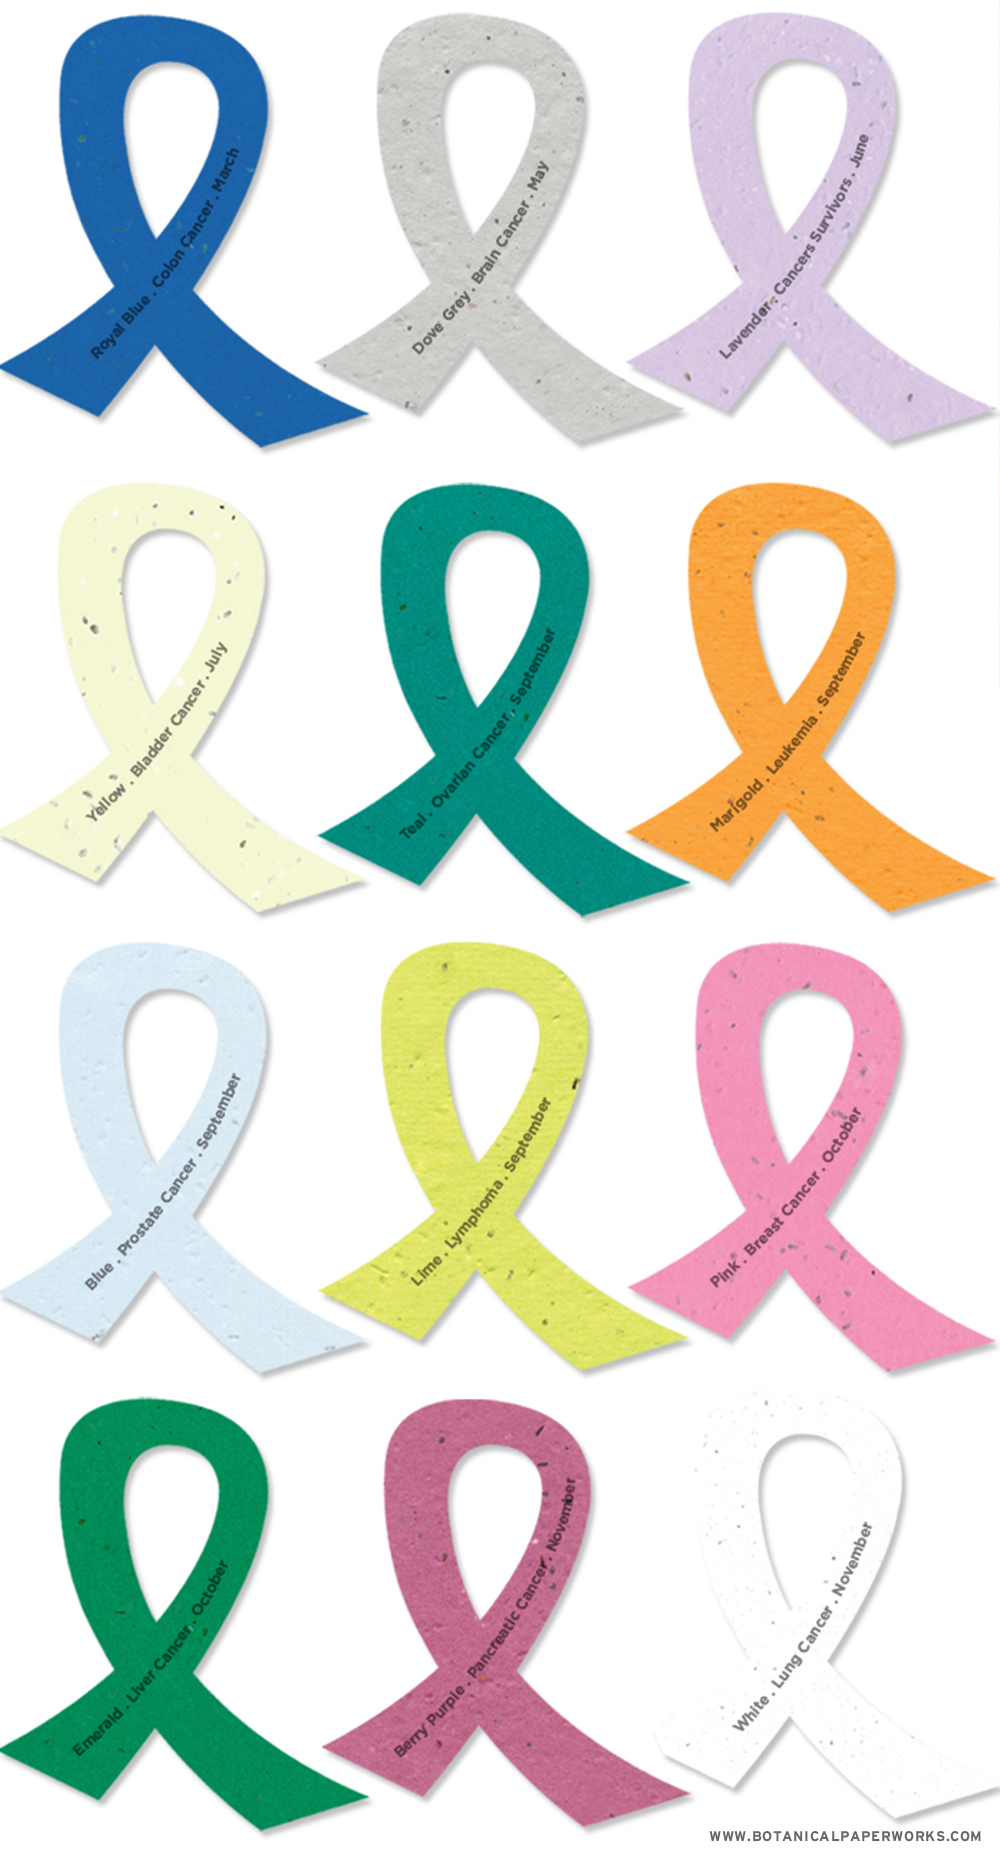 Choose from over 25 seed paper colors for a simple yet powerful awareness campaign message on seed paper ribbons that you plant to grow wildflowers. 